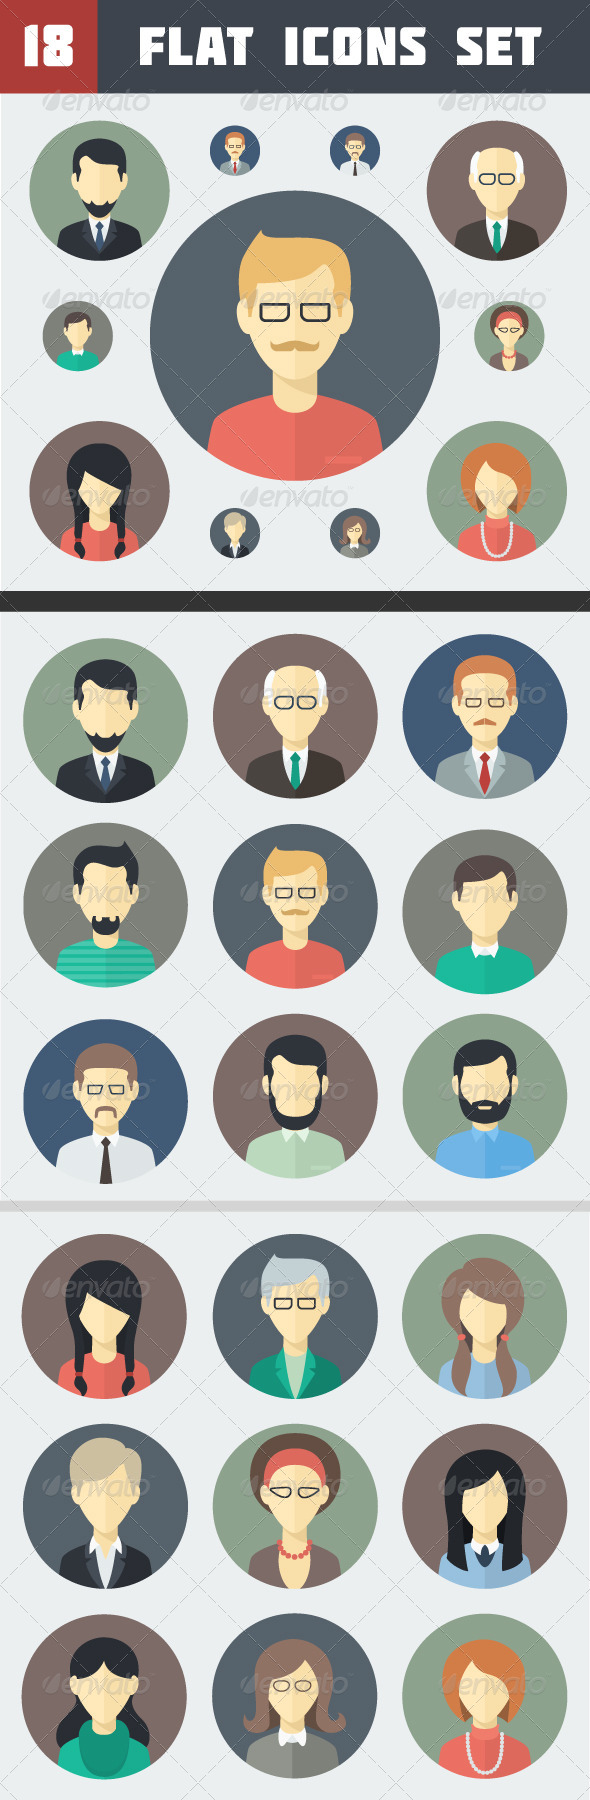 Flat Persons Icons Set 2 by MastakA on Creative Market | Places to 